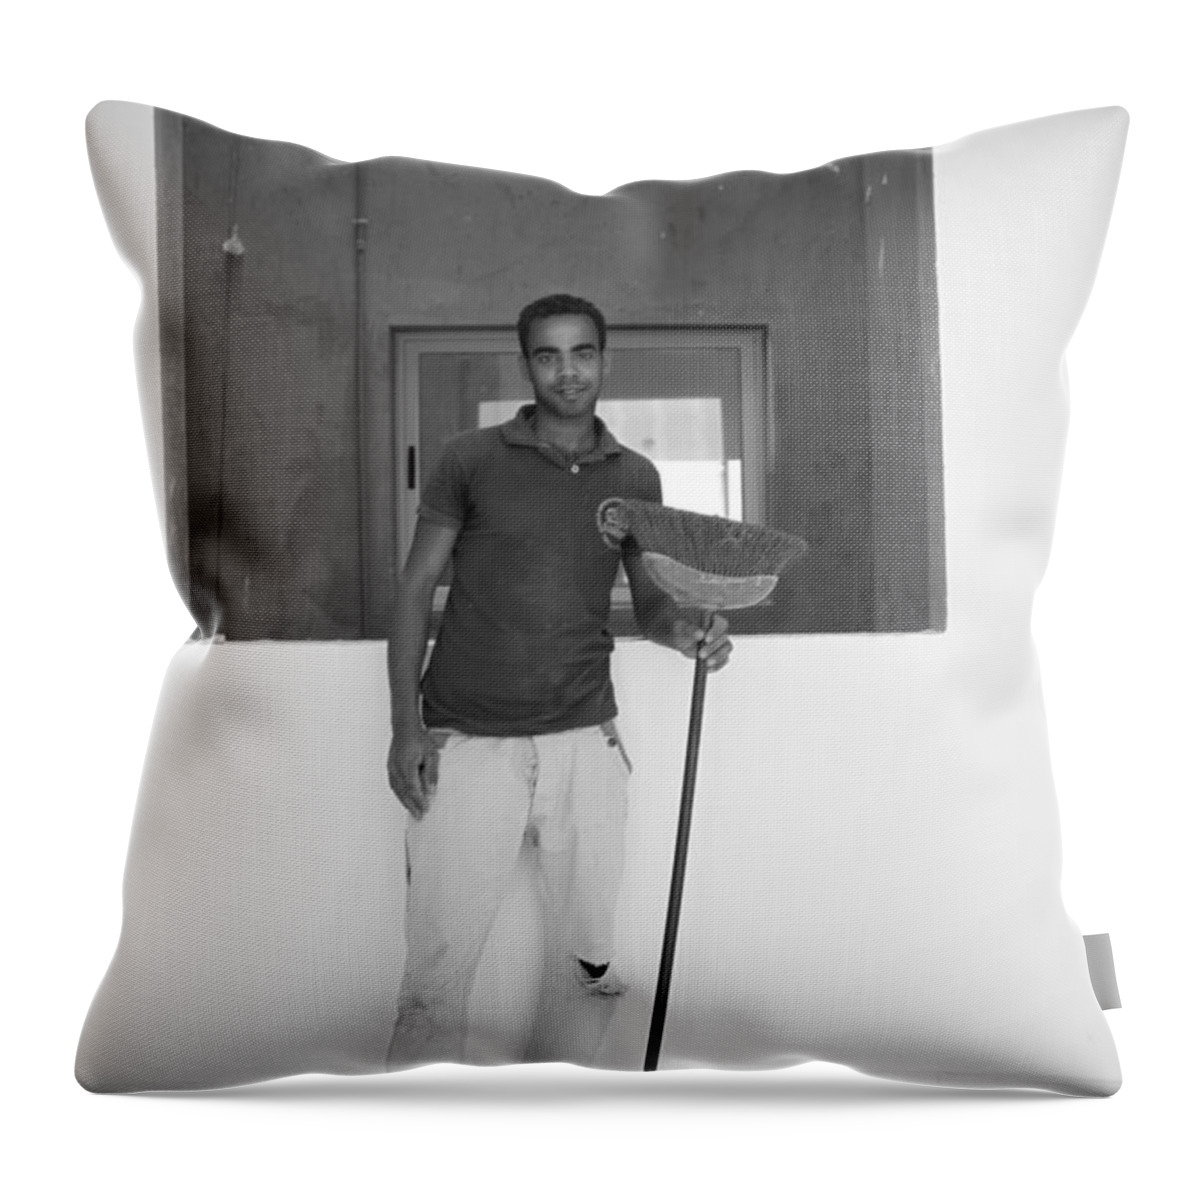 Al-ahyaa Throw Pillow featuring the photograph At Your Command by Jez C Self